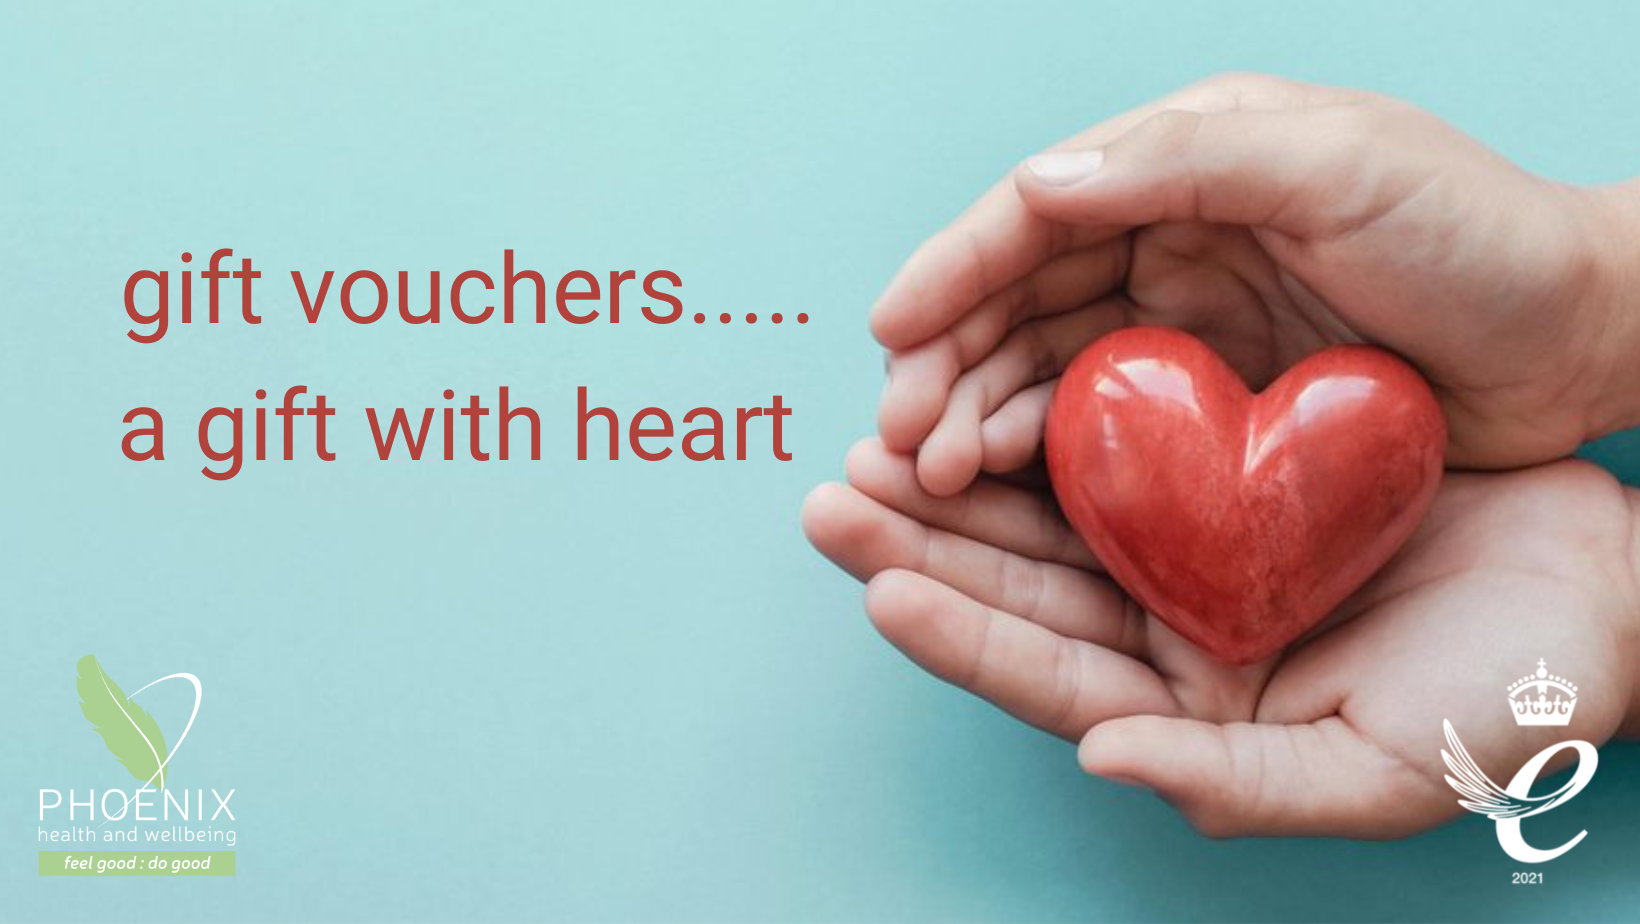 Gift Vouchers Make A Difference